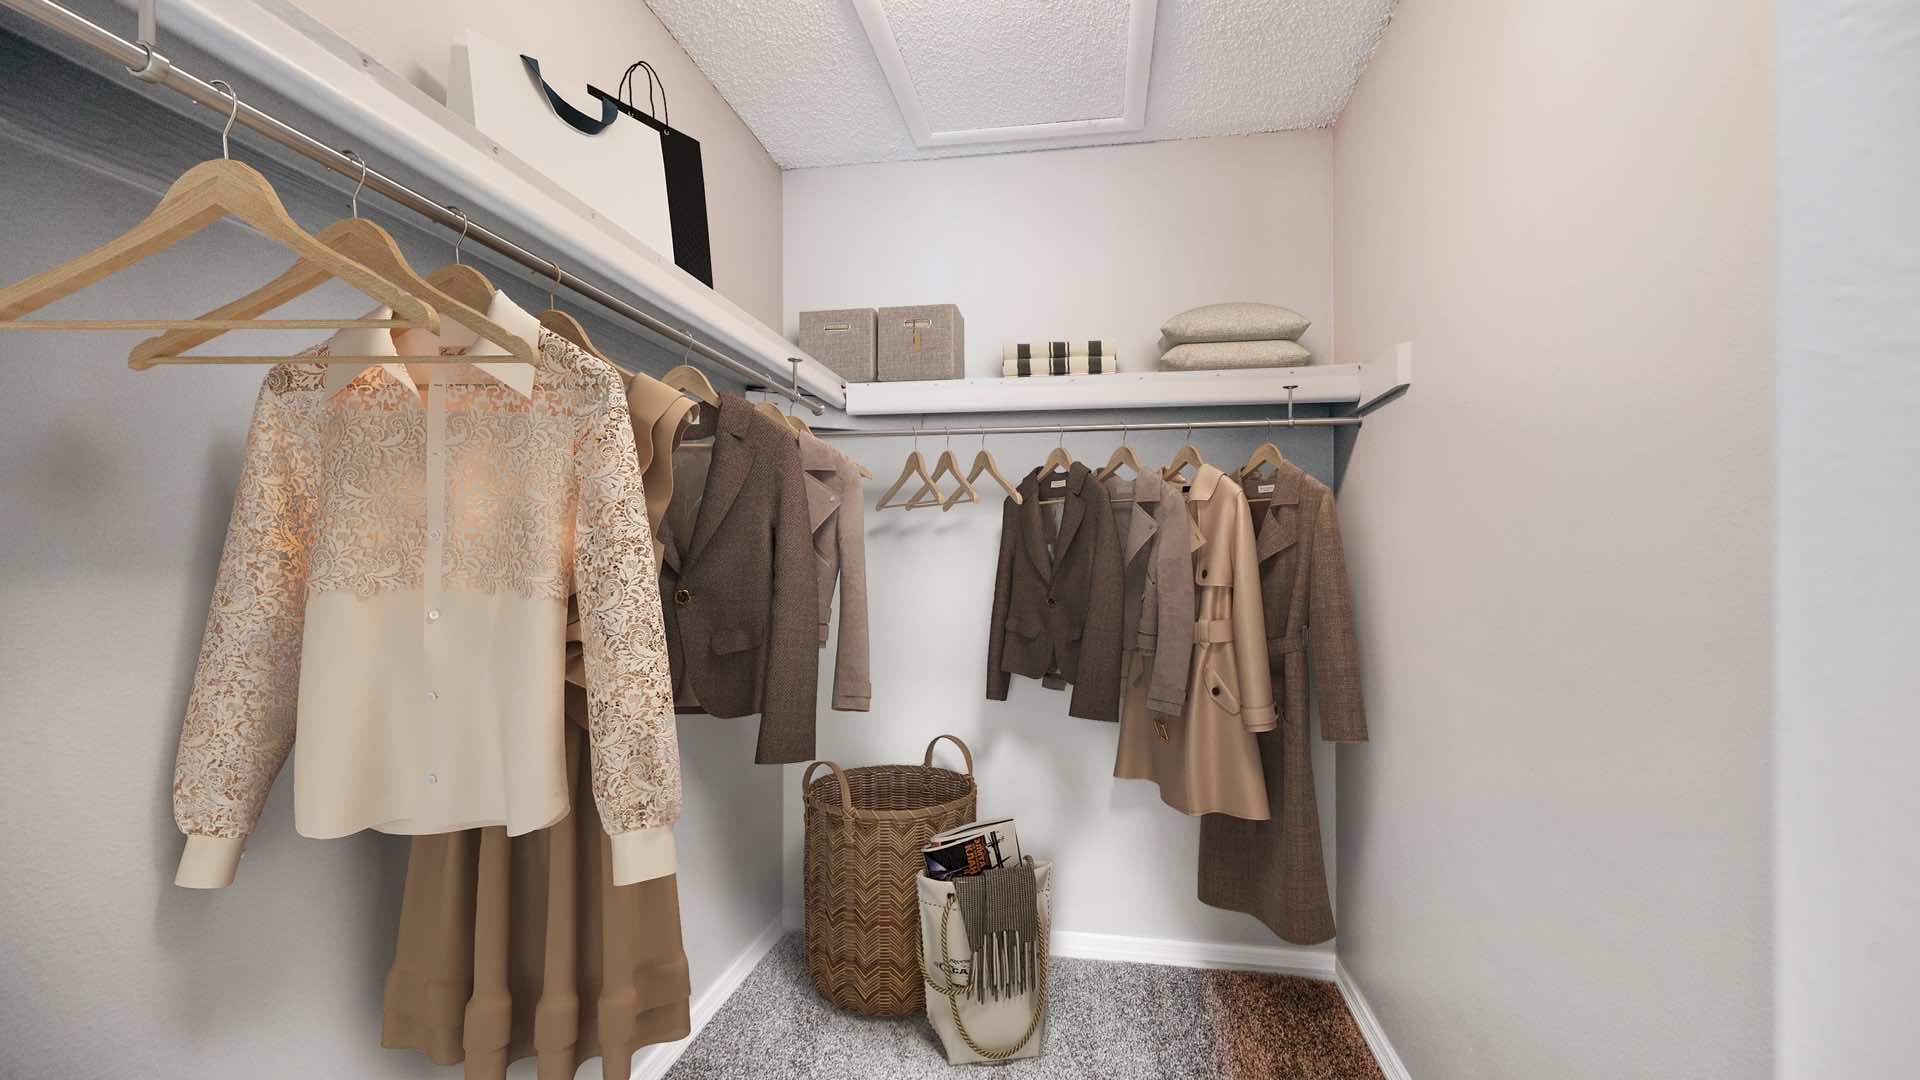 spacious walk-in closet with clothes hanging and shelving